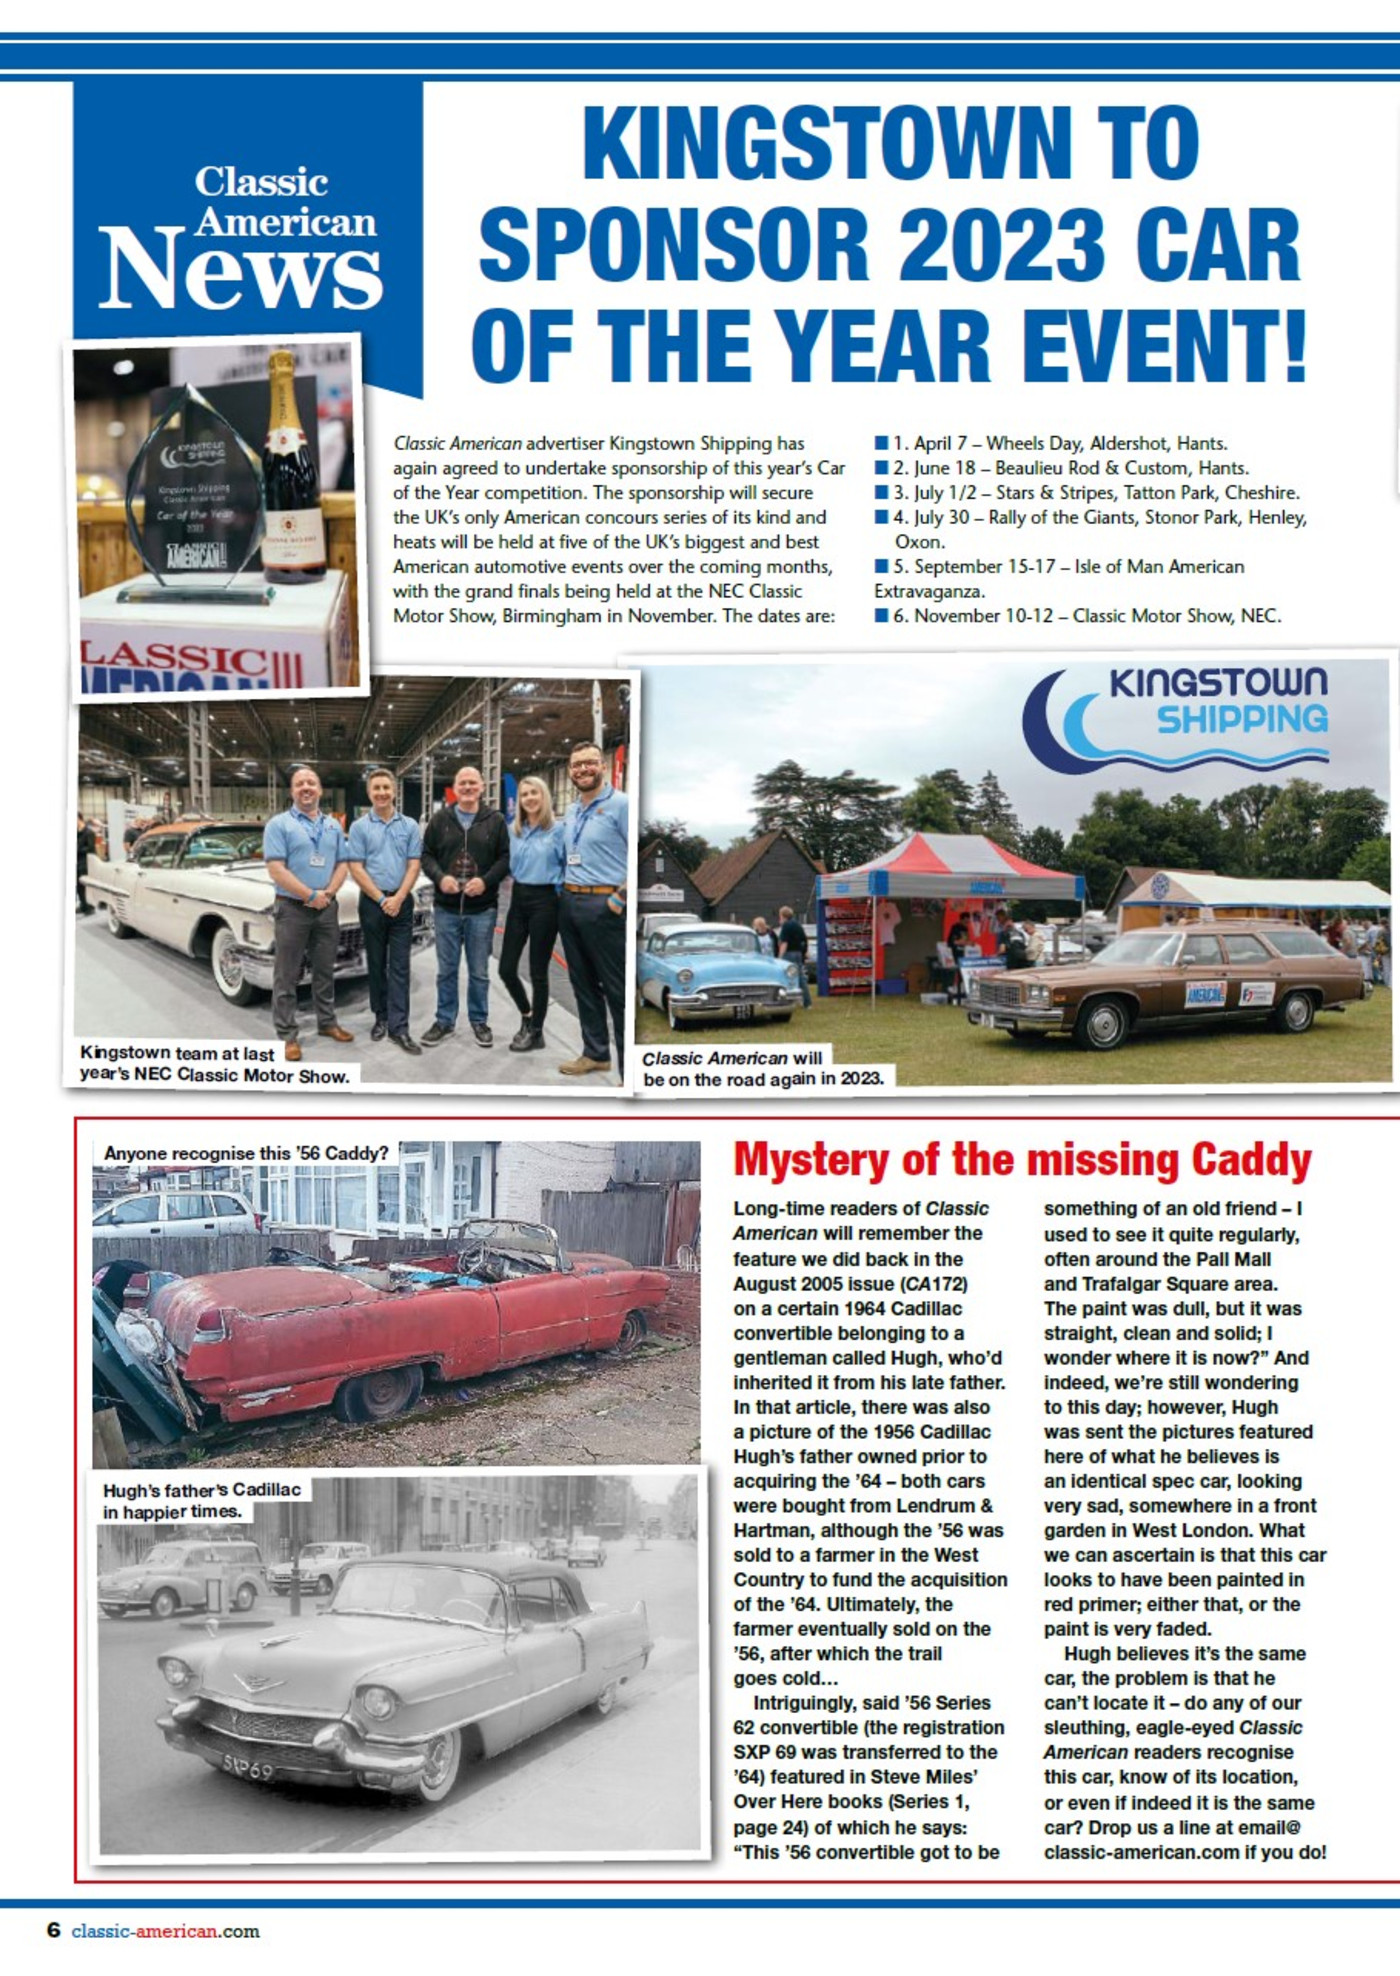 Kingstown Shipping Classic American Magazaine Car of the Year 2023 full page